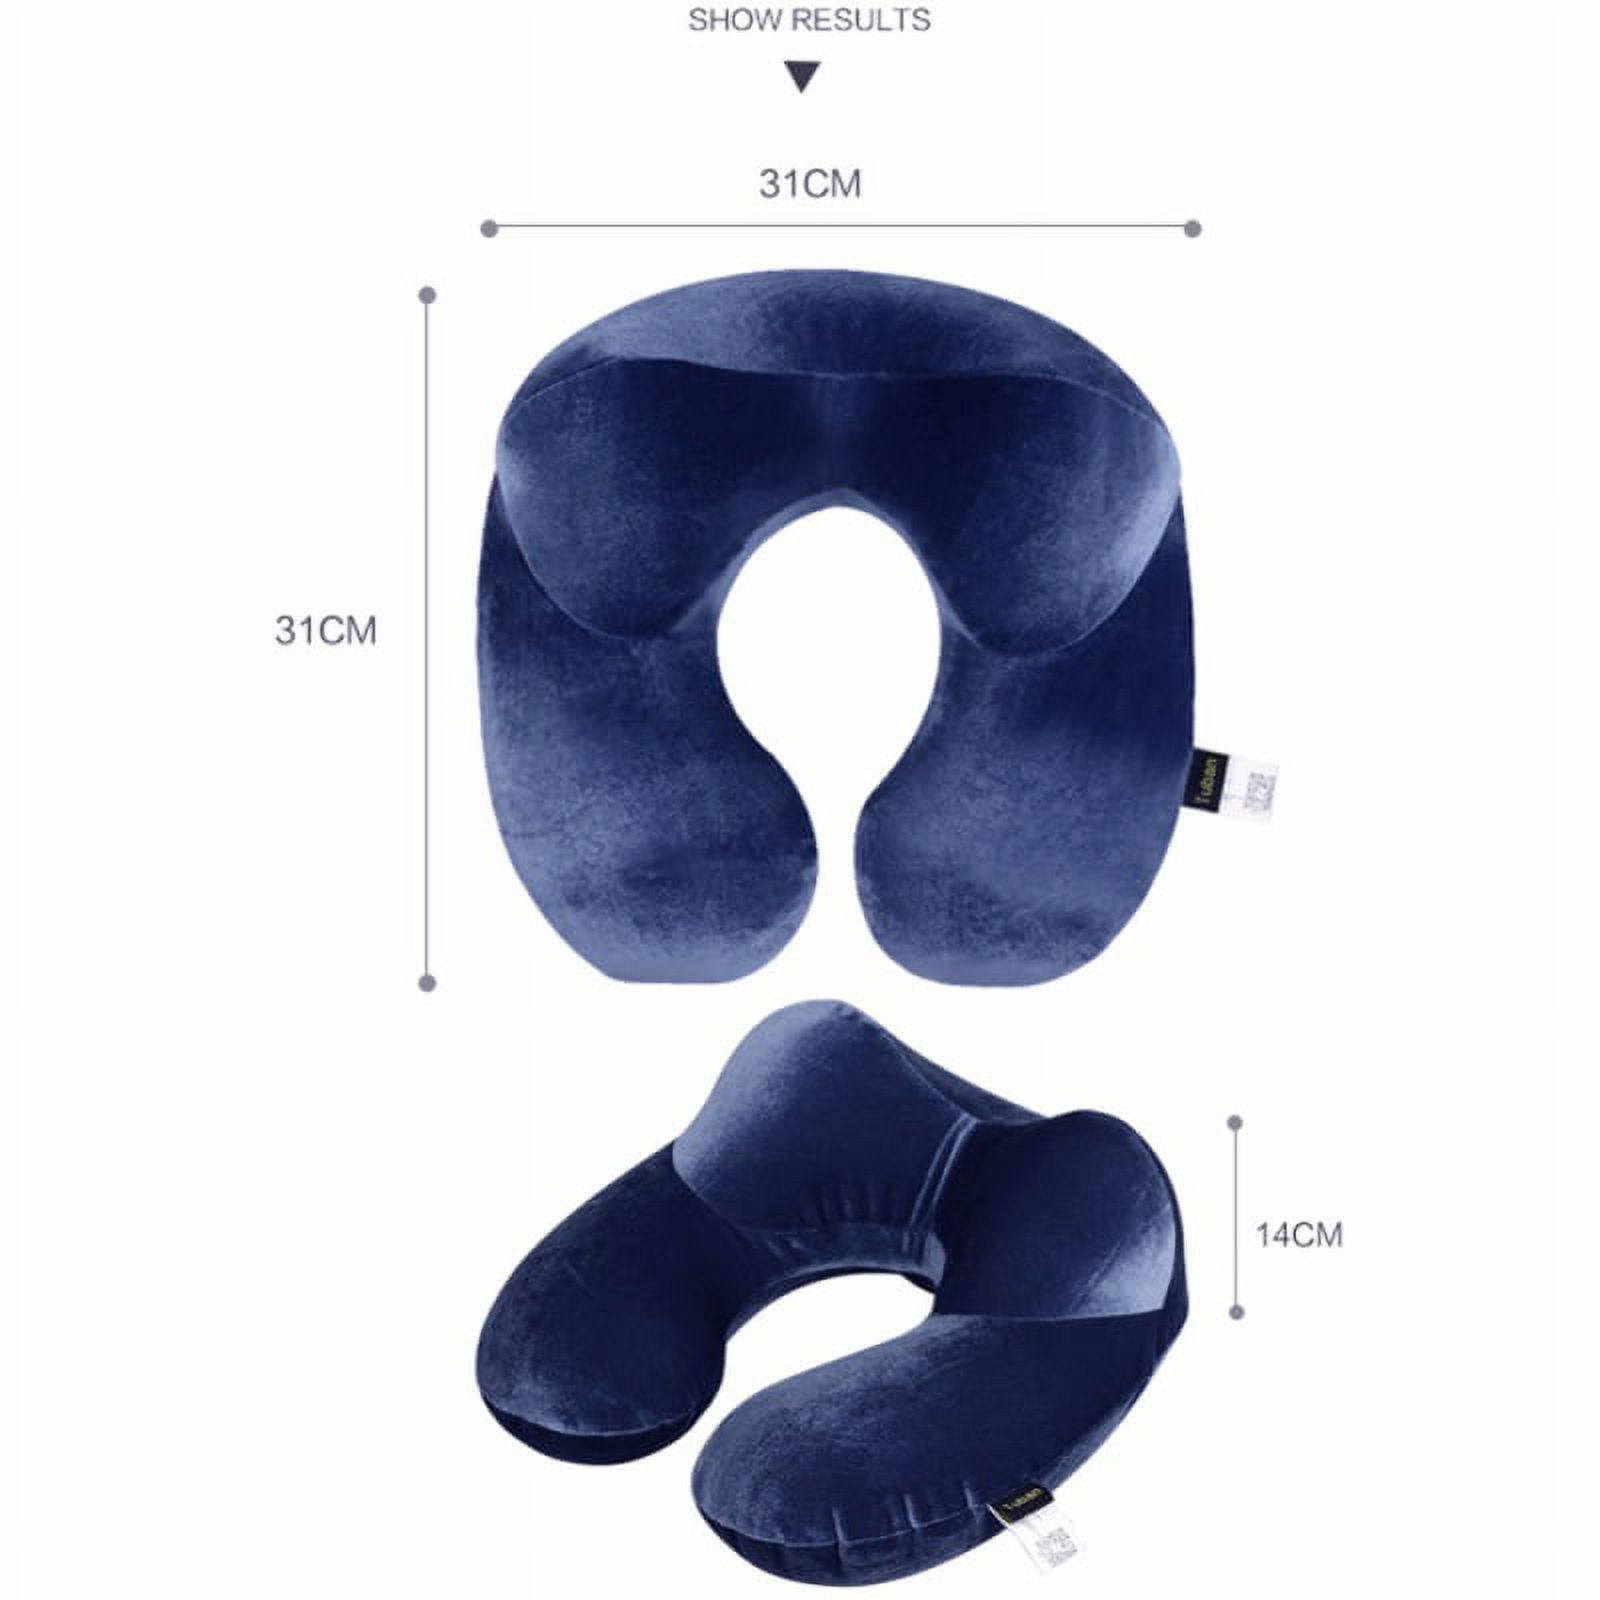 Inflatable Soft Velvet Travel Neck Pillow Set, U Shape, Neck Support for Cars, Airplanes Camping - image 3 of 5